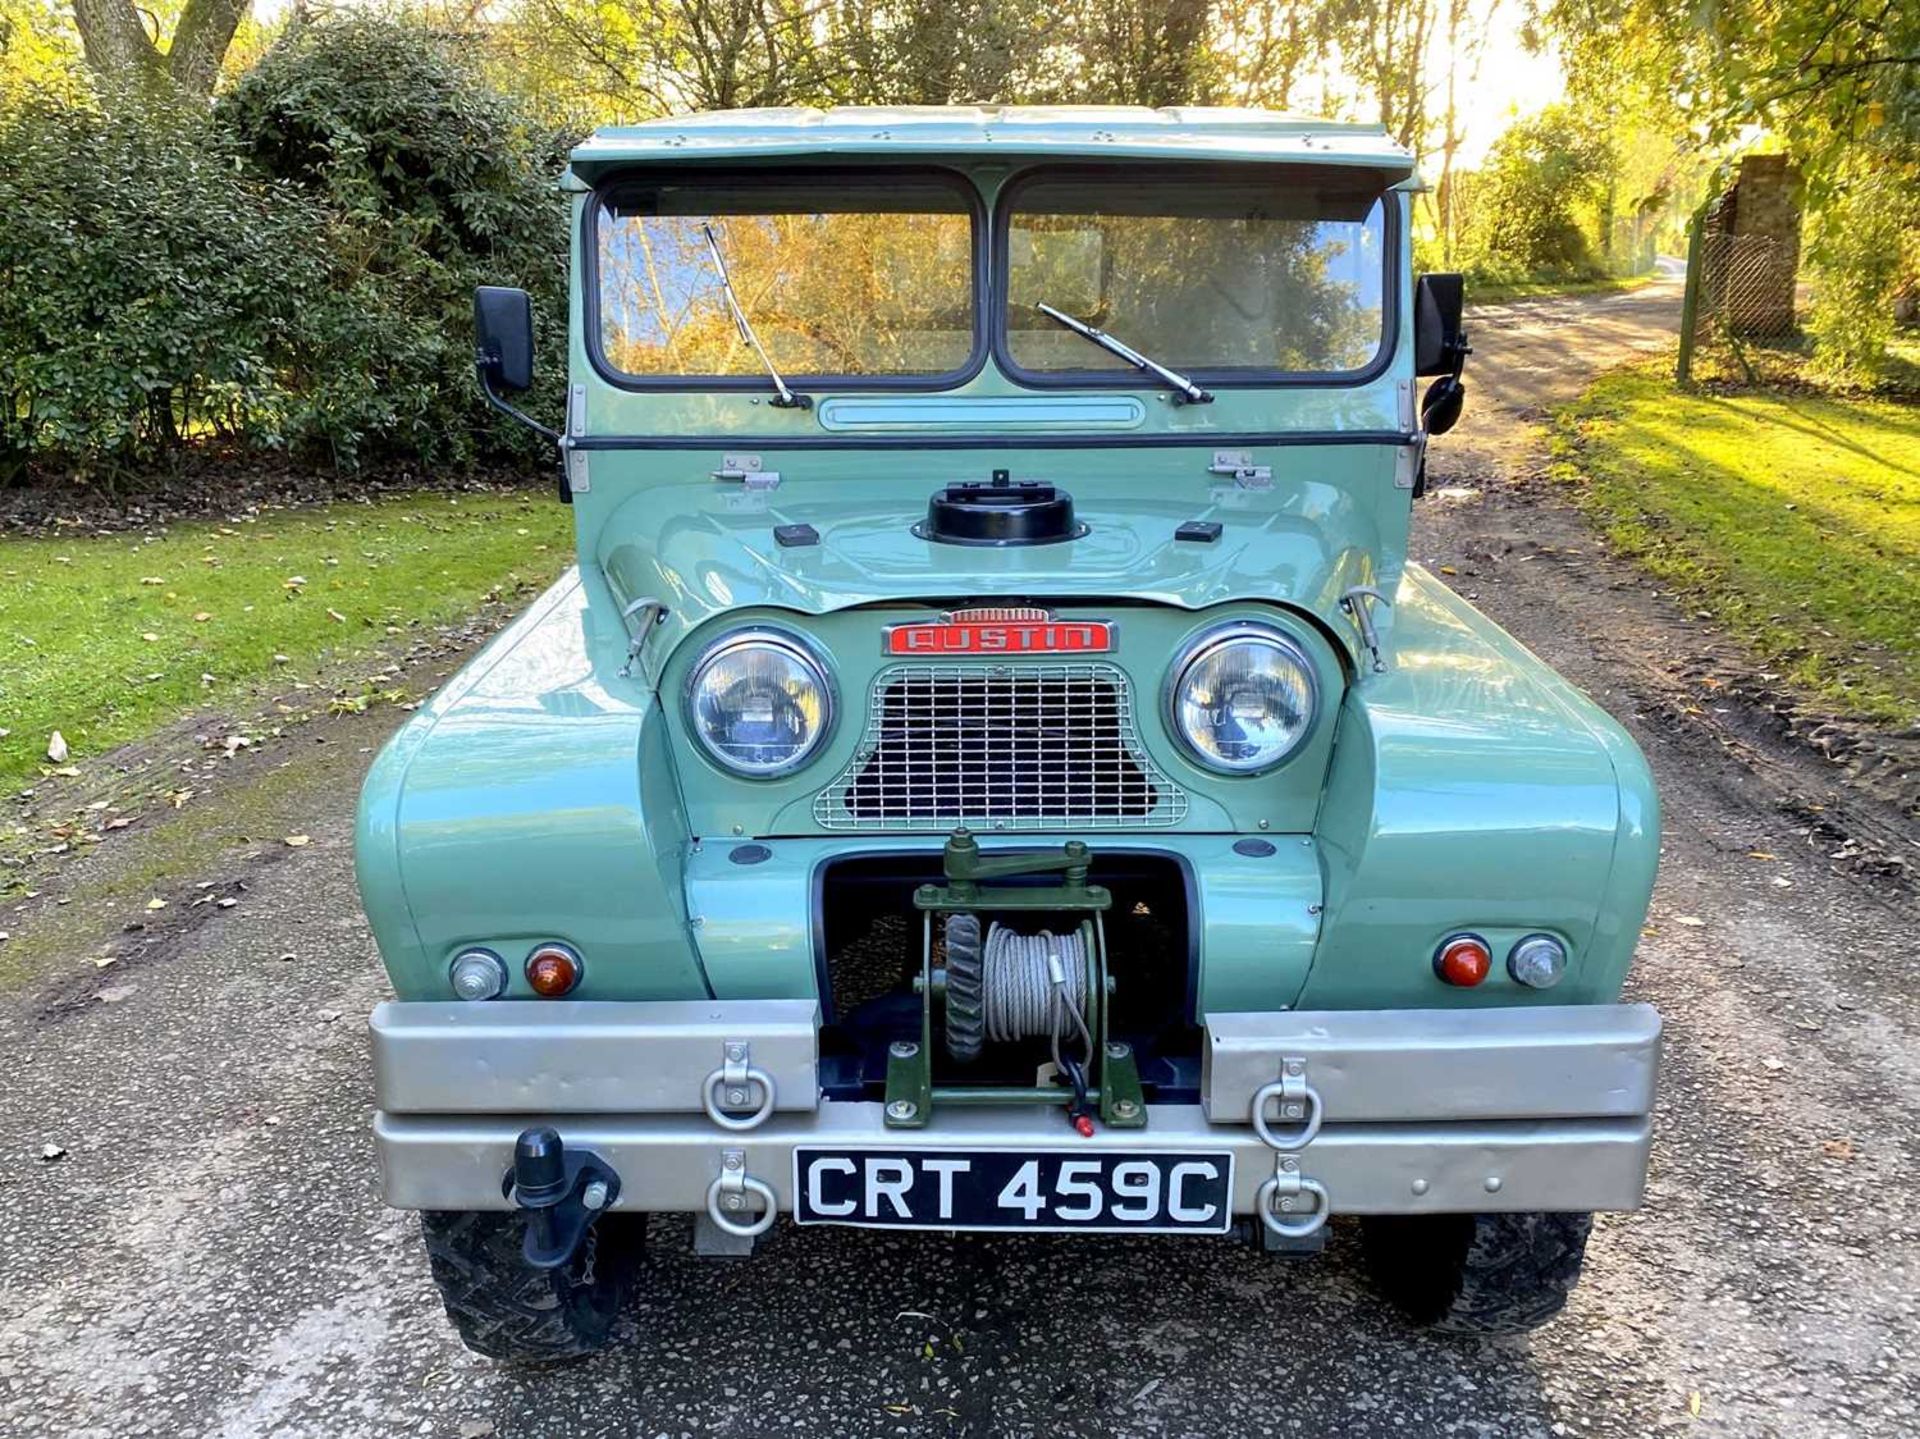 1965 Austin Gipsy SWB Restored to a high standard throughout - Image 16 of 87